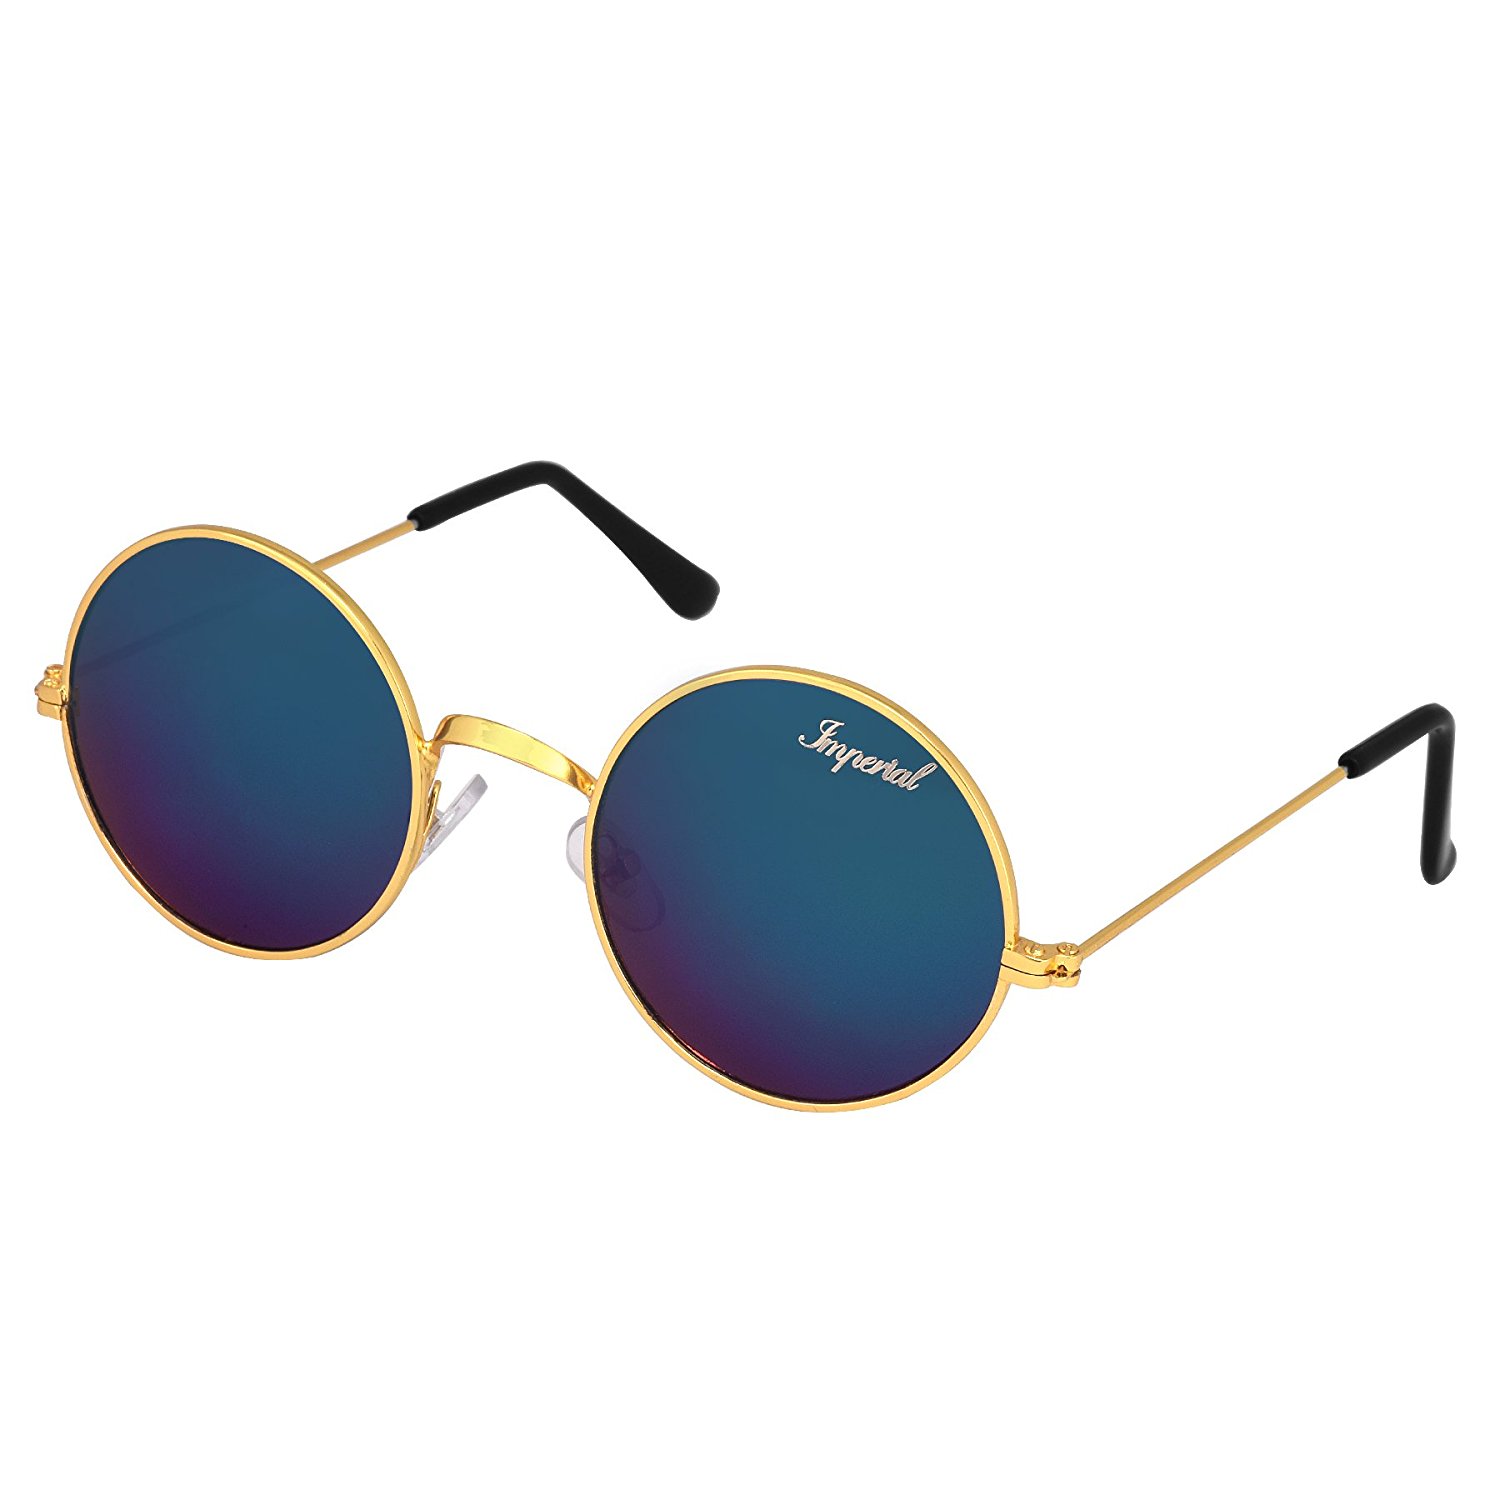 Imperial Club Round Unisex Sunglasses(Wy037|40|Blue): Amazon.in ...